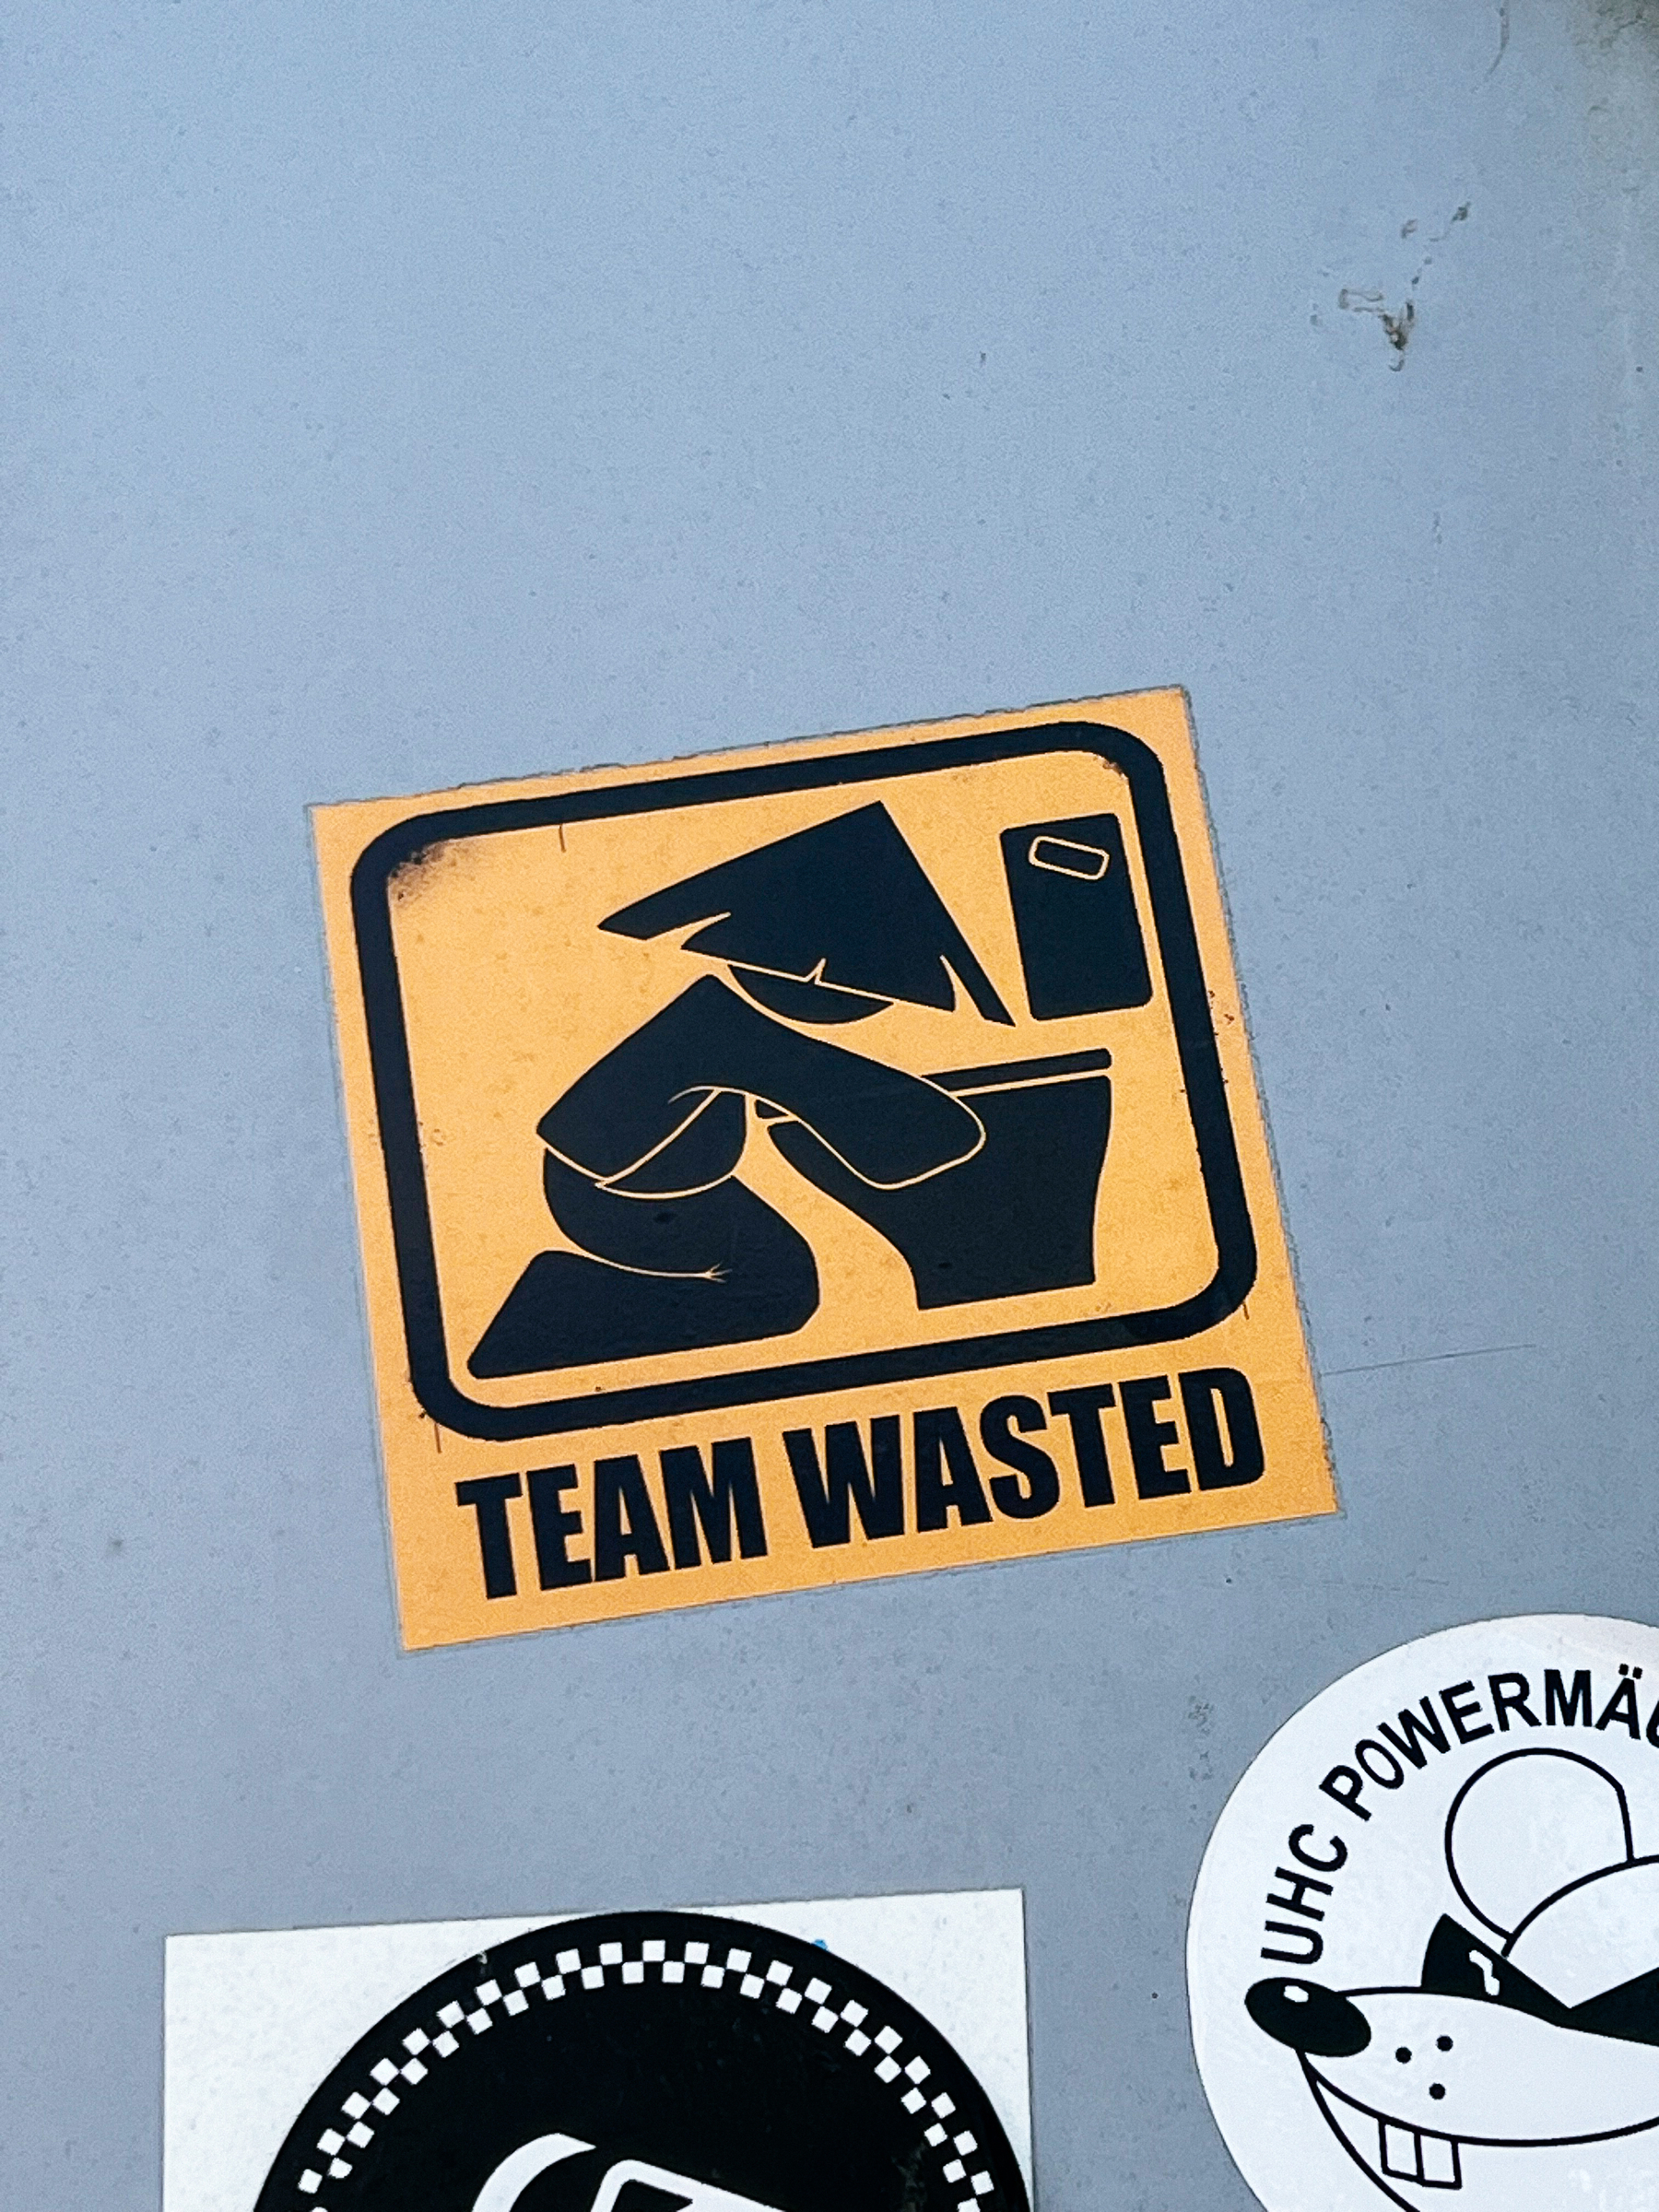 A sticker with a yellow background and a design of a person throwing up in a toilet bowl reads, &ldquo;TEAM WASTED,&rdquo; adhered to a grey surface alongside other stickers.